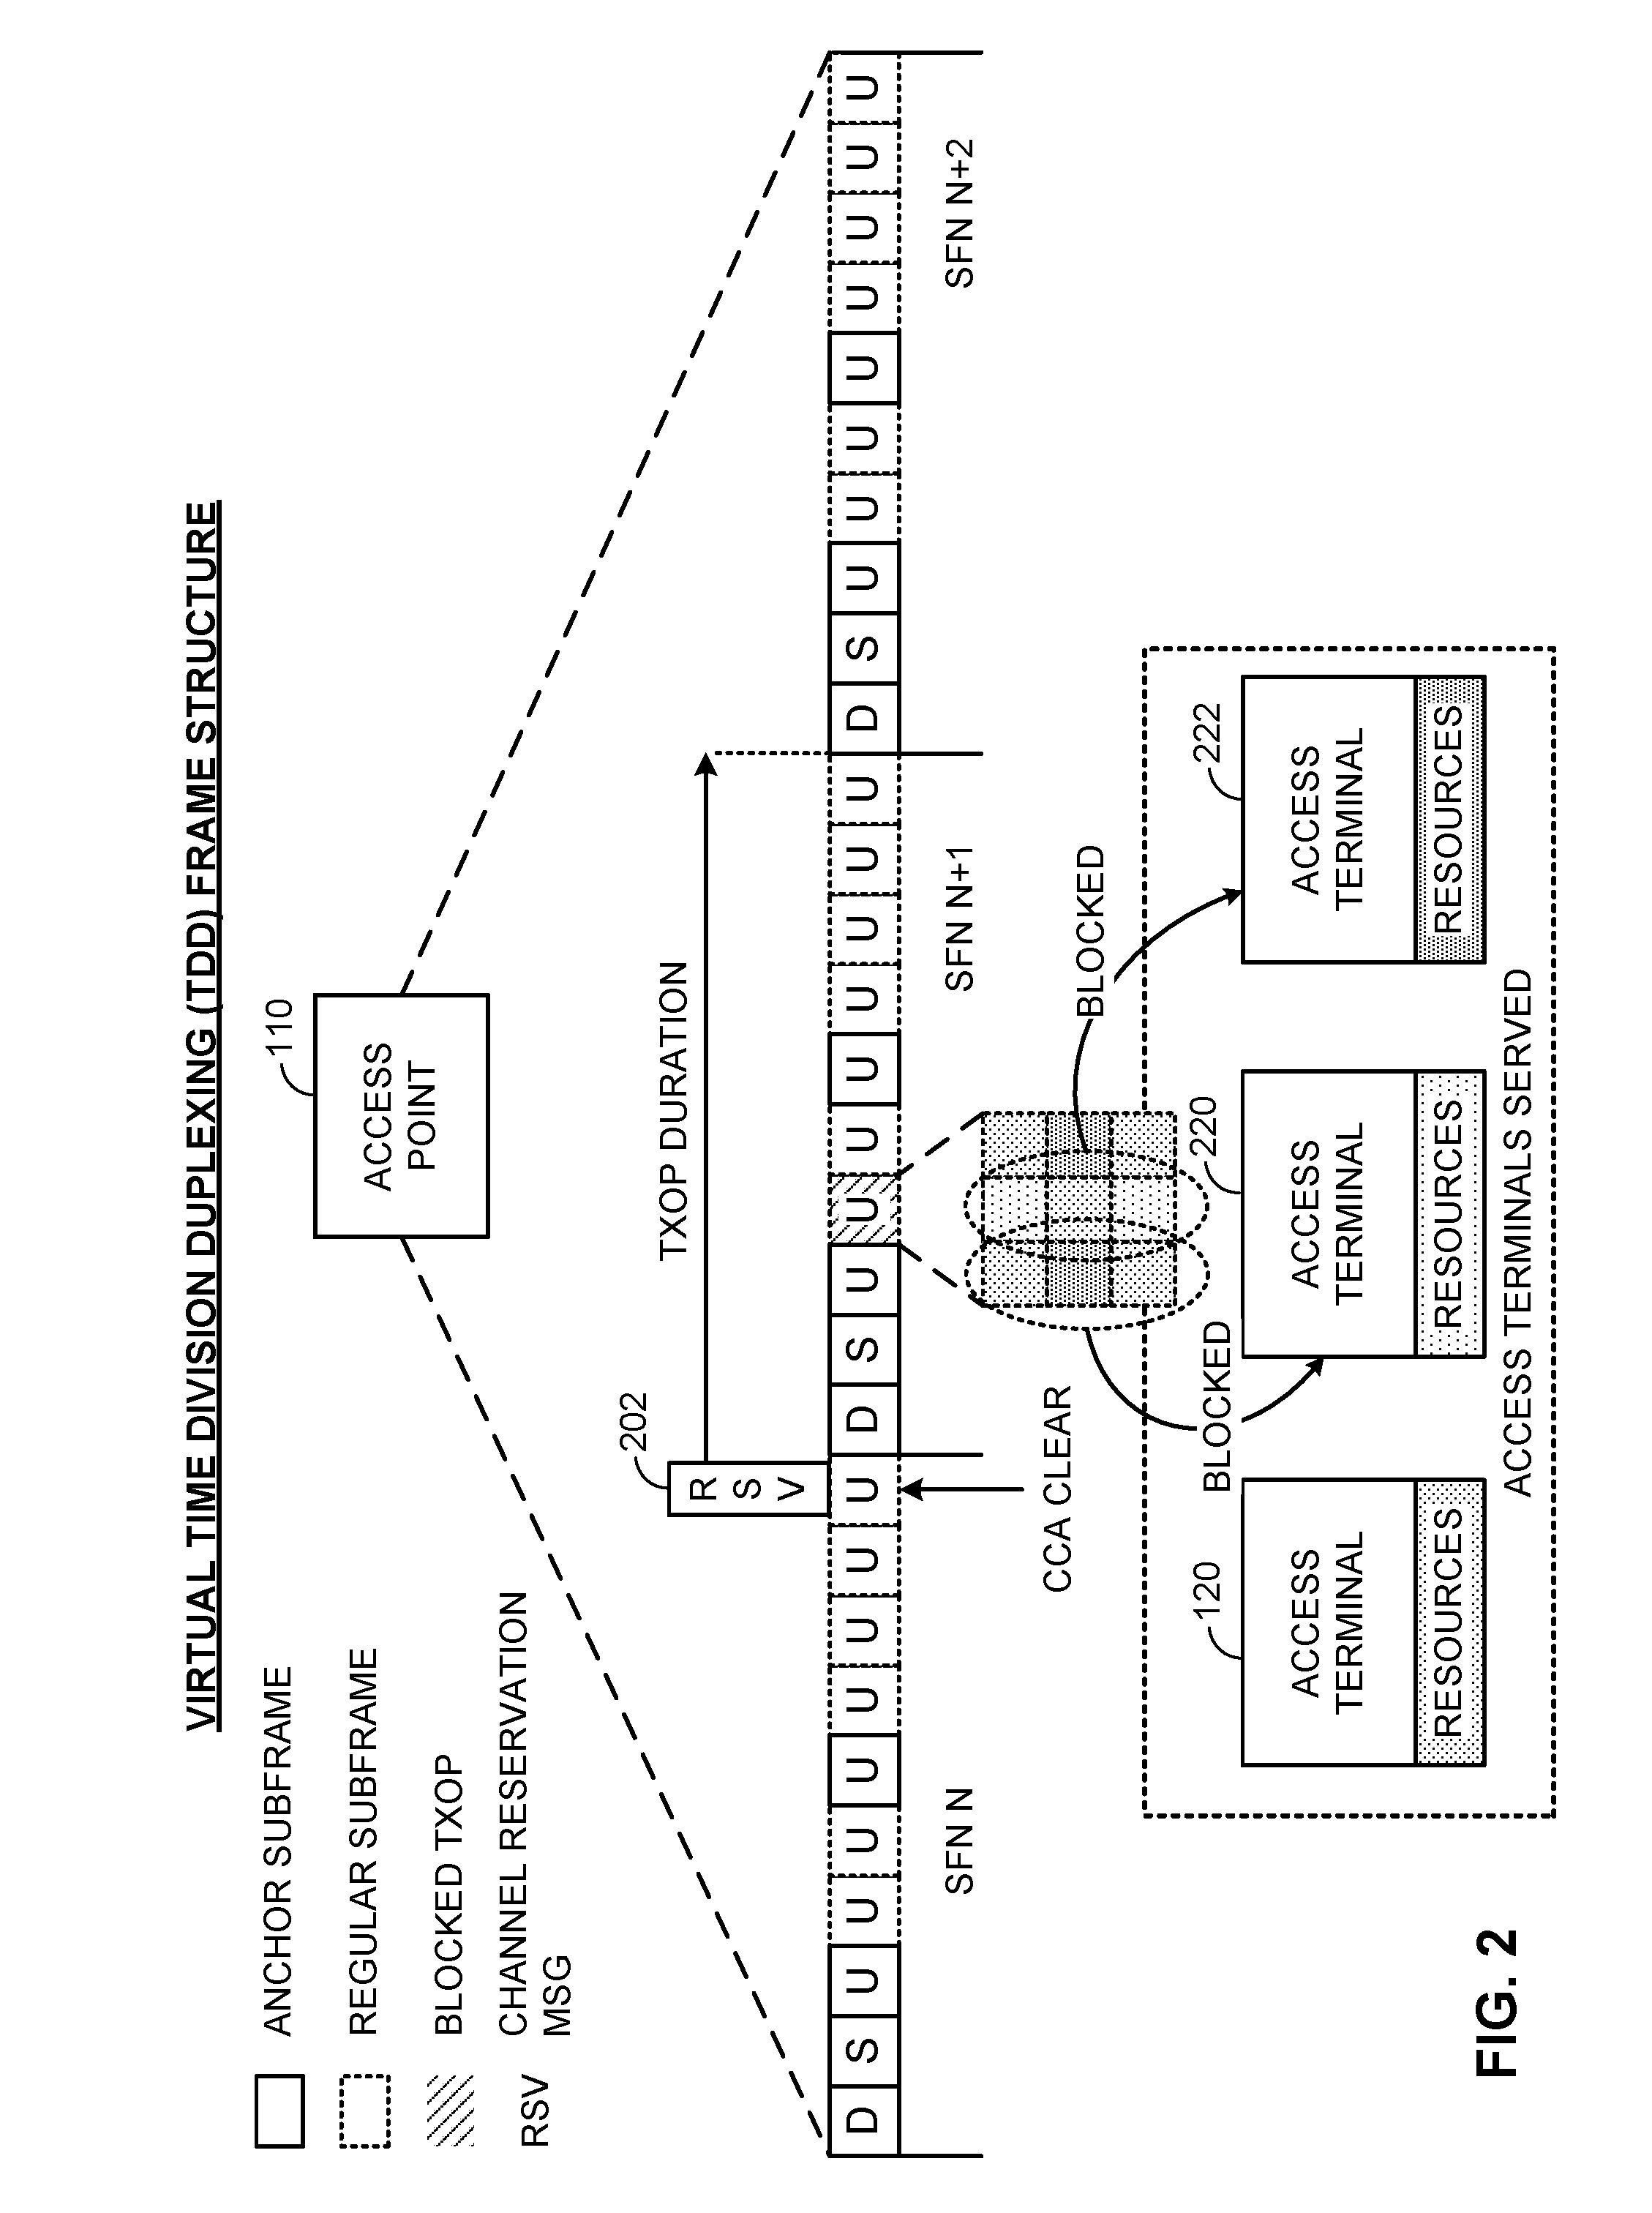 Inter-access terminal unblocking and enhanced contention for co-existence on a shared communication medium